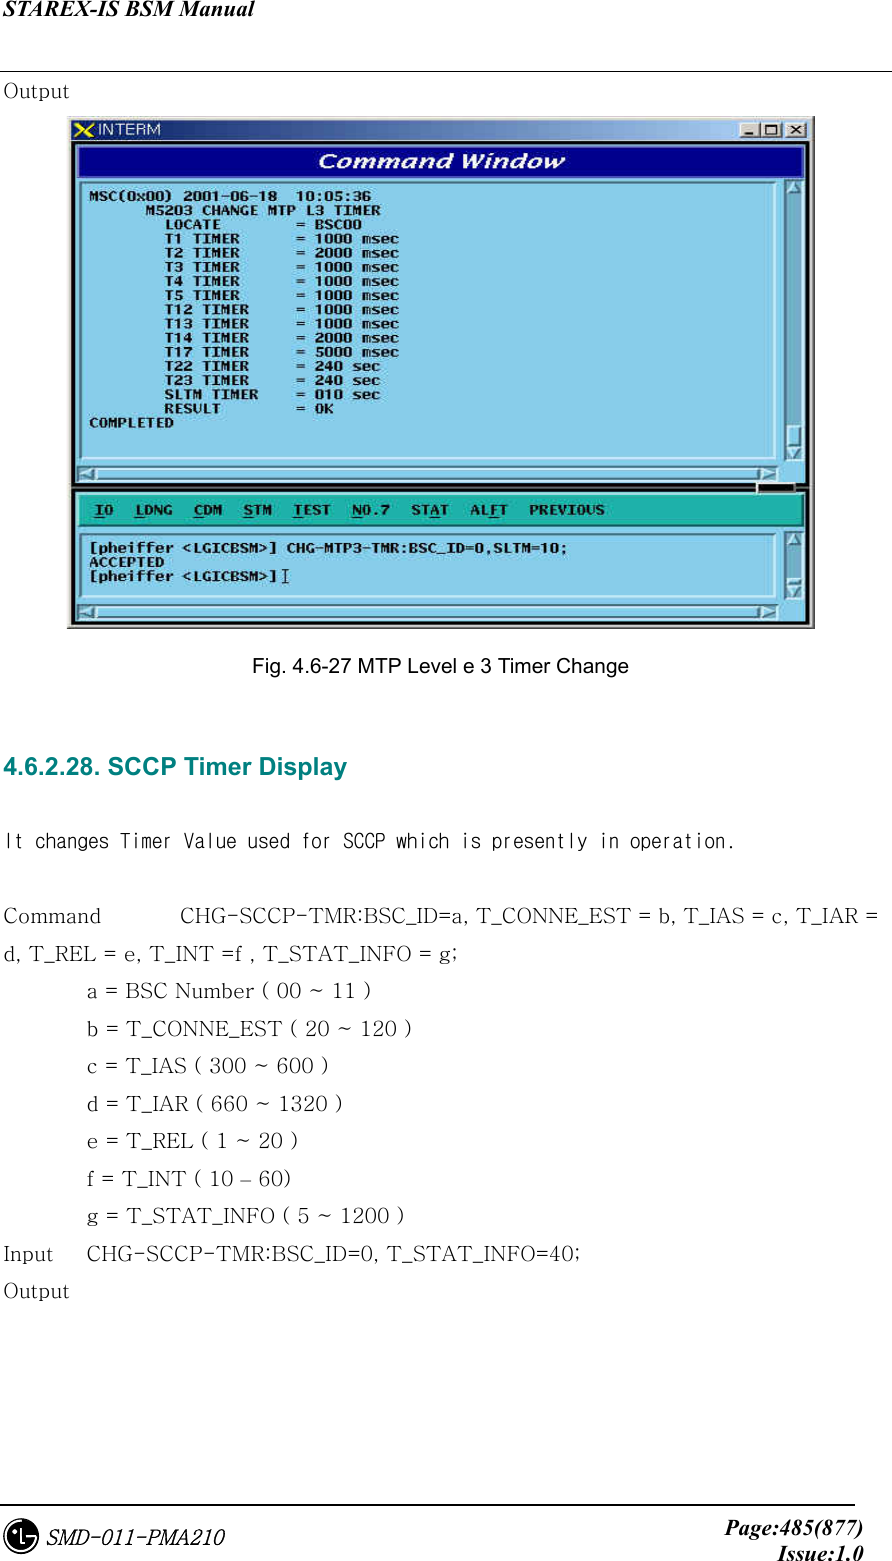 STAREX-IS BSM Manual     Page:485(877)Issue:1.0SMD-011-PMA210 Output  Fig. 4.6-27 MTP Level e 3 Timer Change  4.6.2.28. SCCP Timer Display  It changes Timer Value used for SCCP which is presently in operation.  Command    CHG-SCCP-TMR:BSC_ID=a, T_CONNE_EST = b, T_IAS = c, T_IAR = d, T_REL = e, T_INT =f , T_STAT_INFO = g;   a = BSC Number ( 00 ~ 11 )   b = T_CONNE_EST ( 20 ~ 120 )   c = T_IAS ( 300 ~ 600 )   d = T_IAR ( 660 ~ 1320 )   e = T_REL ( 1 ~ 20 )   f = T_INT ( 10 – 60)   g = T_STAT_INFO ( 5 ~ 1200 ) Input    CHG-SCCP-TMR:BSC_ID=0, T_STAT_INFO=40; Output 